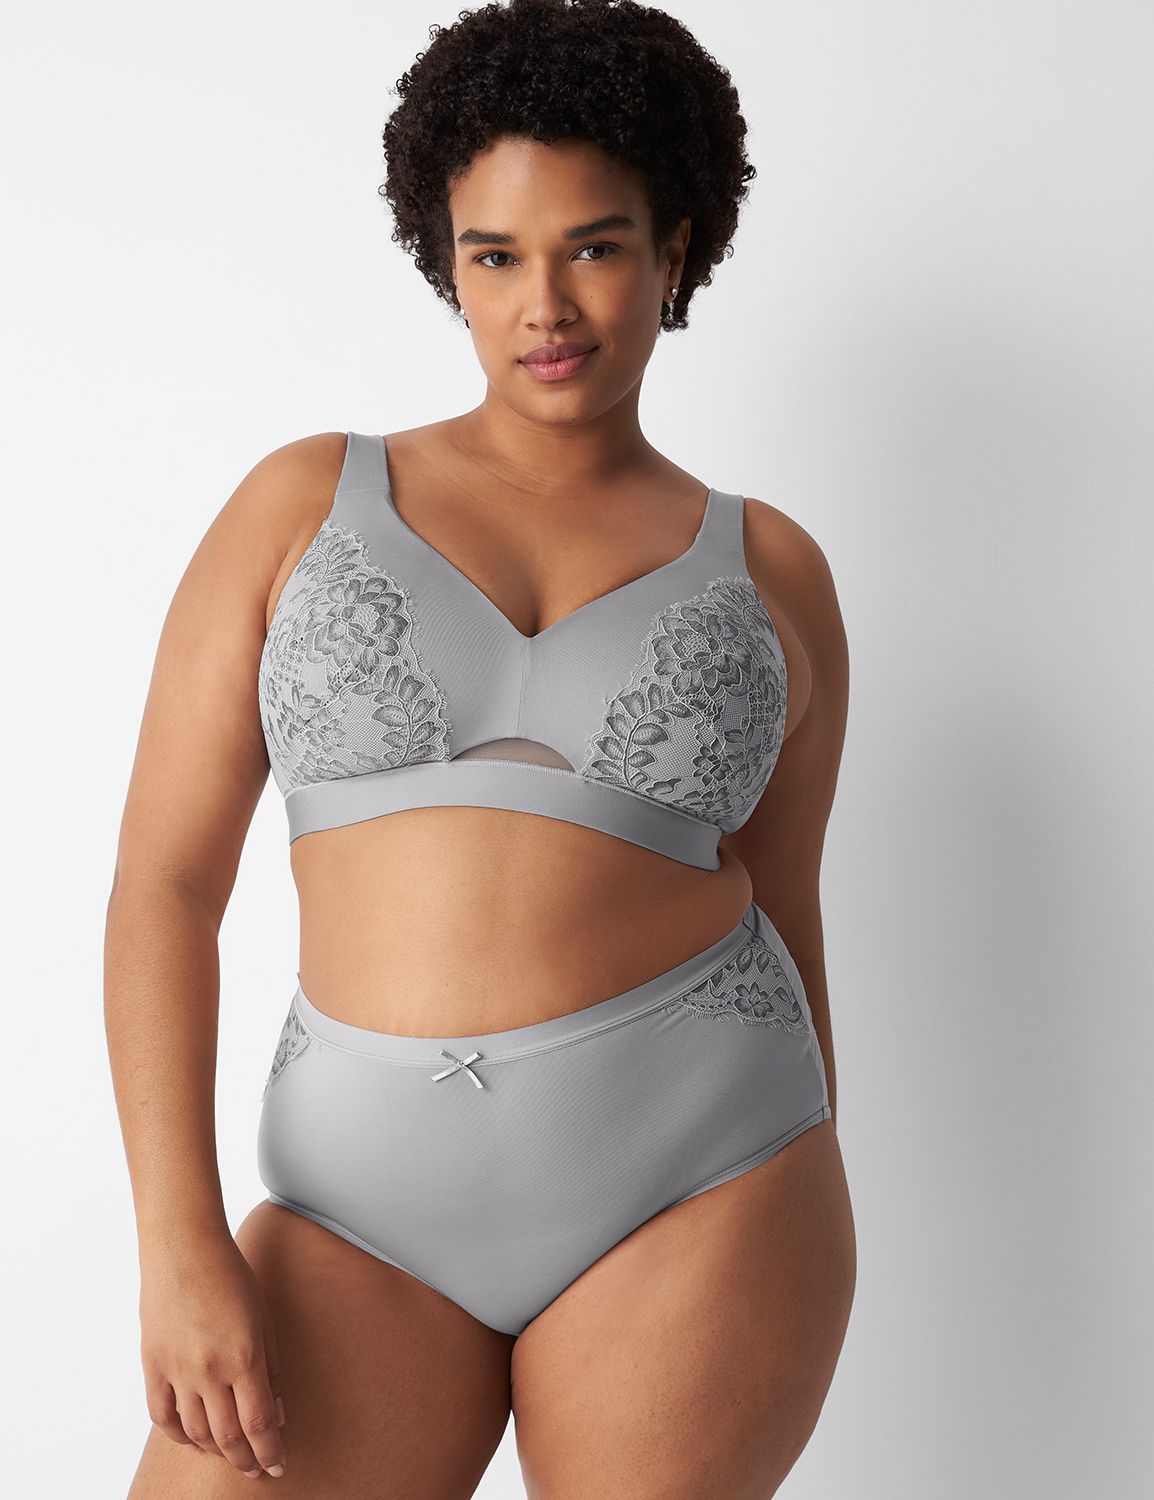 Lane Bryant - We'll make this brief 😉: 6/$30 Cacique panties. Today only!  Shop